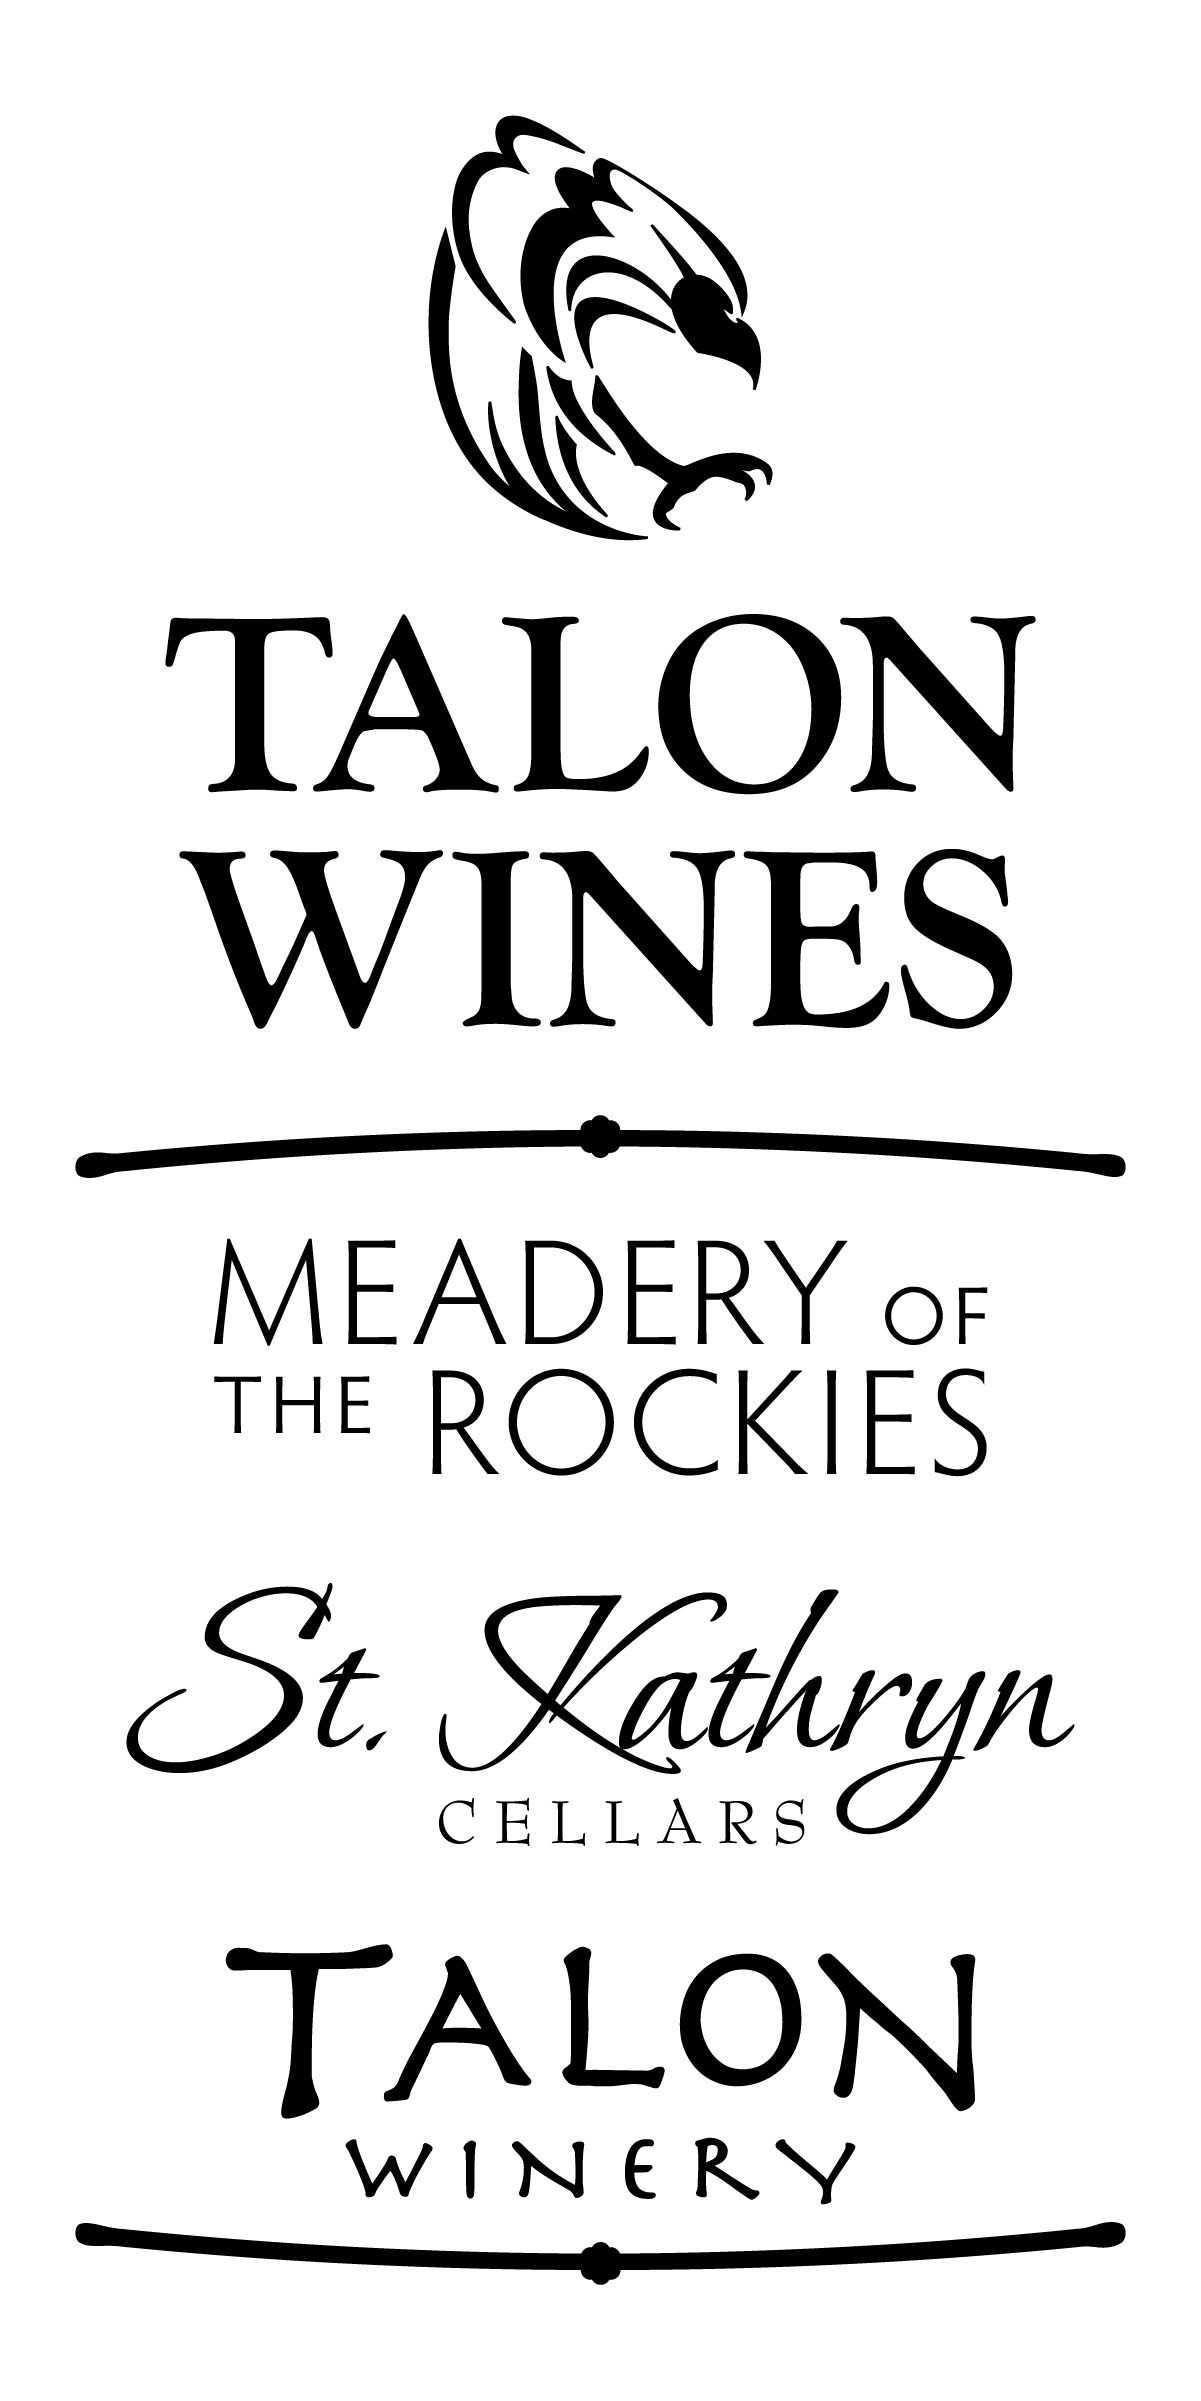 Talon Wines at the Meadery